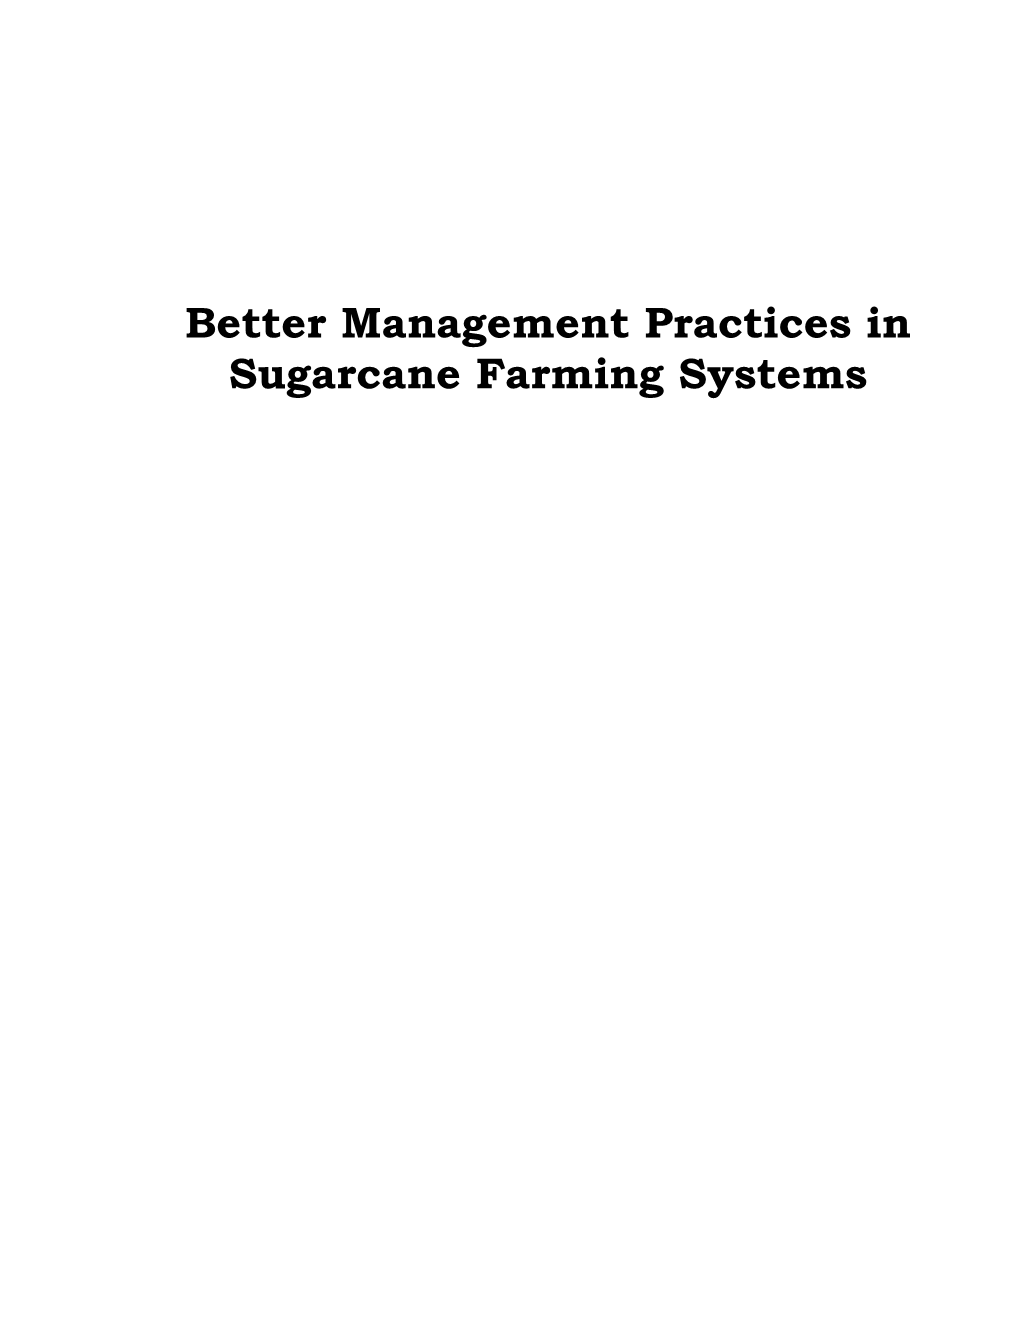 Better Management Practices in Sugarcane Farming Systems